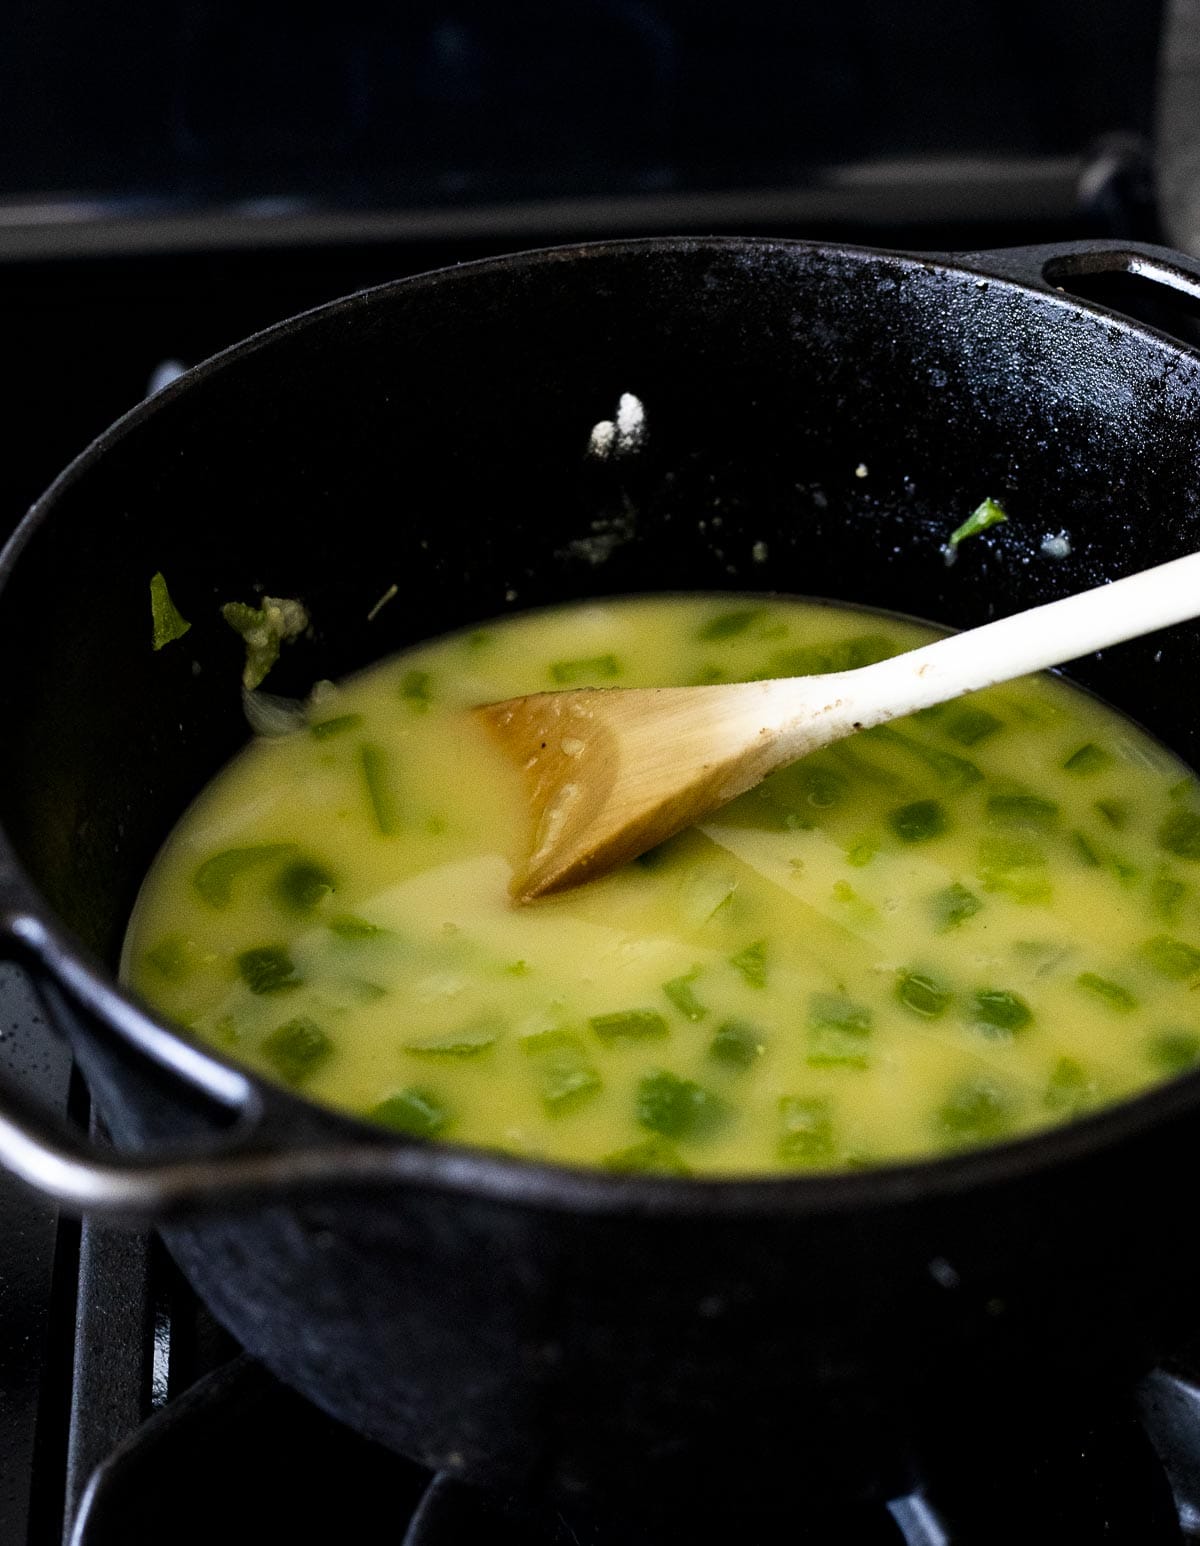 Vegetables and thickened broth being stirred in a pot.